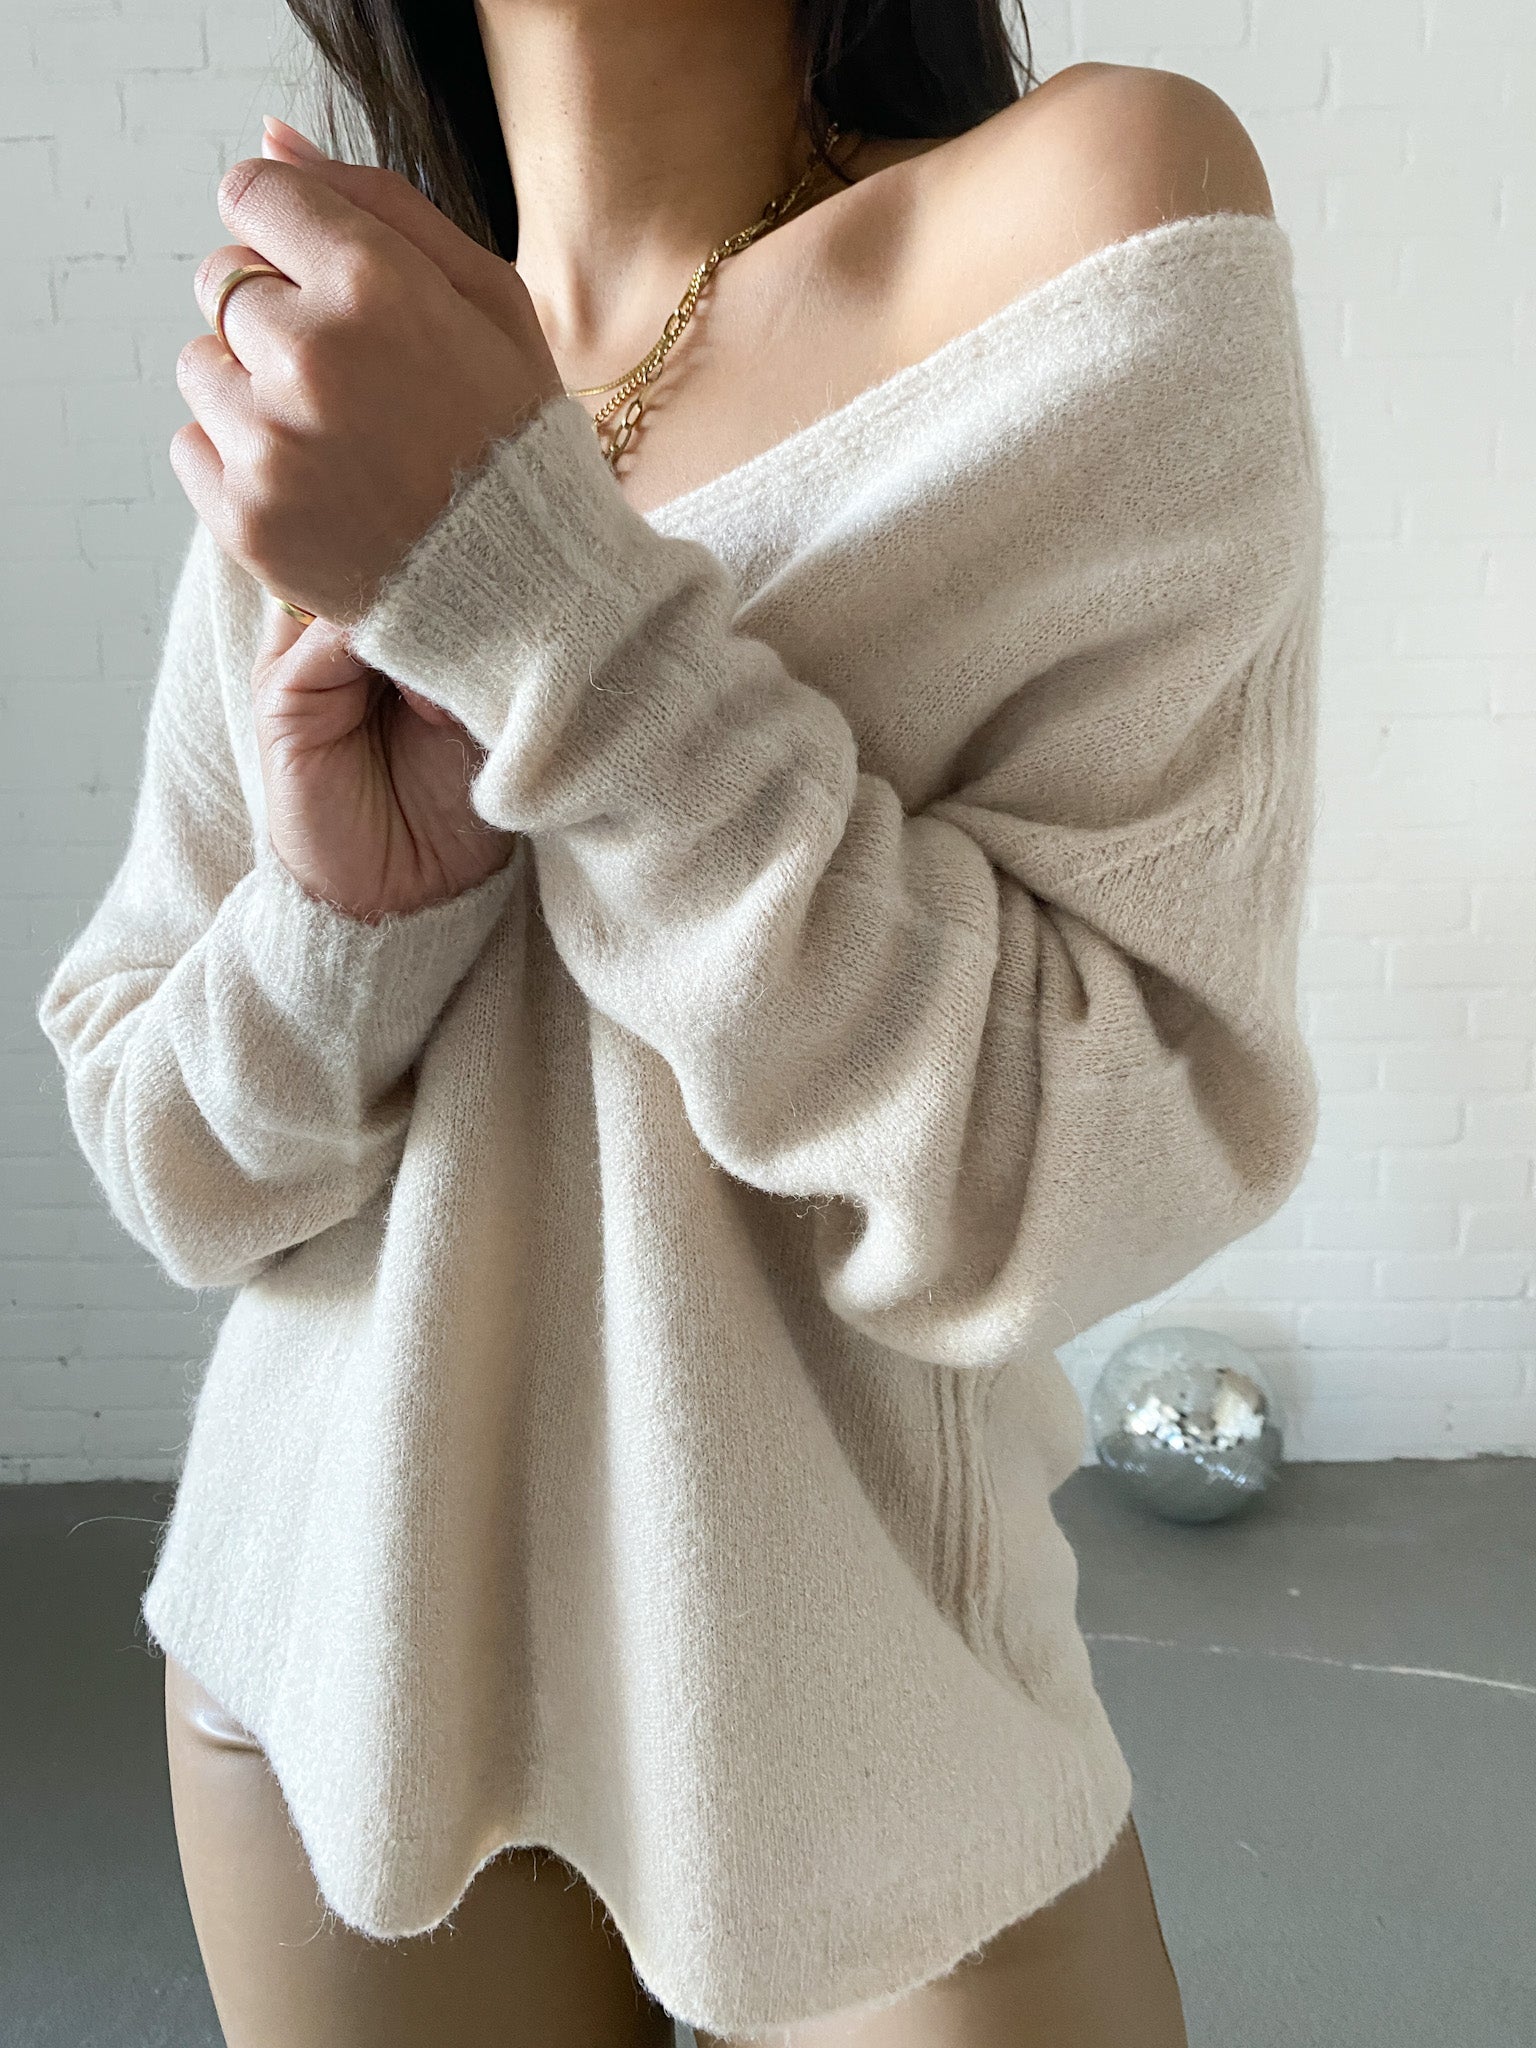 Softy Pullover, beige